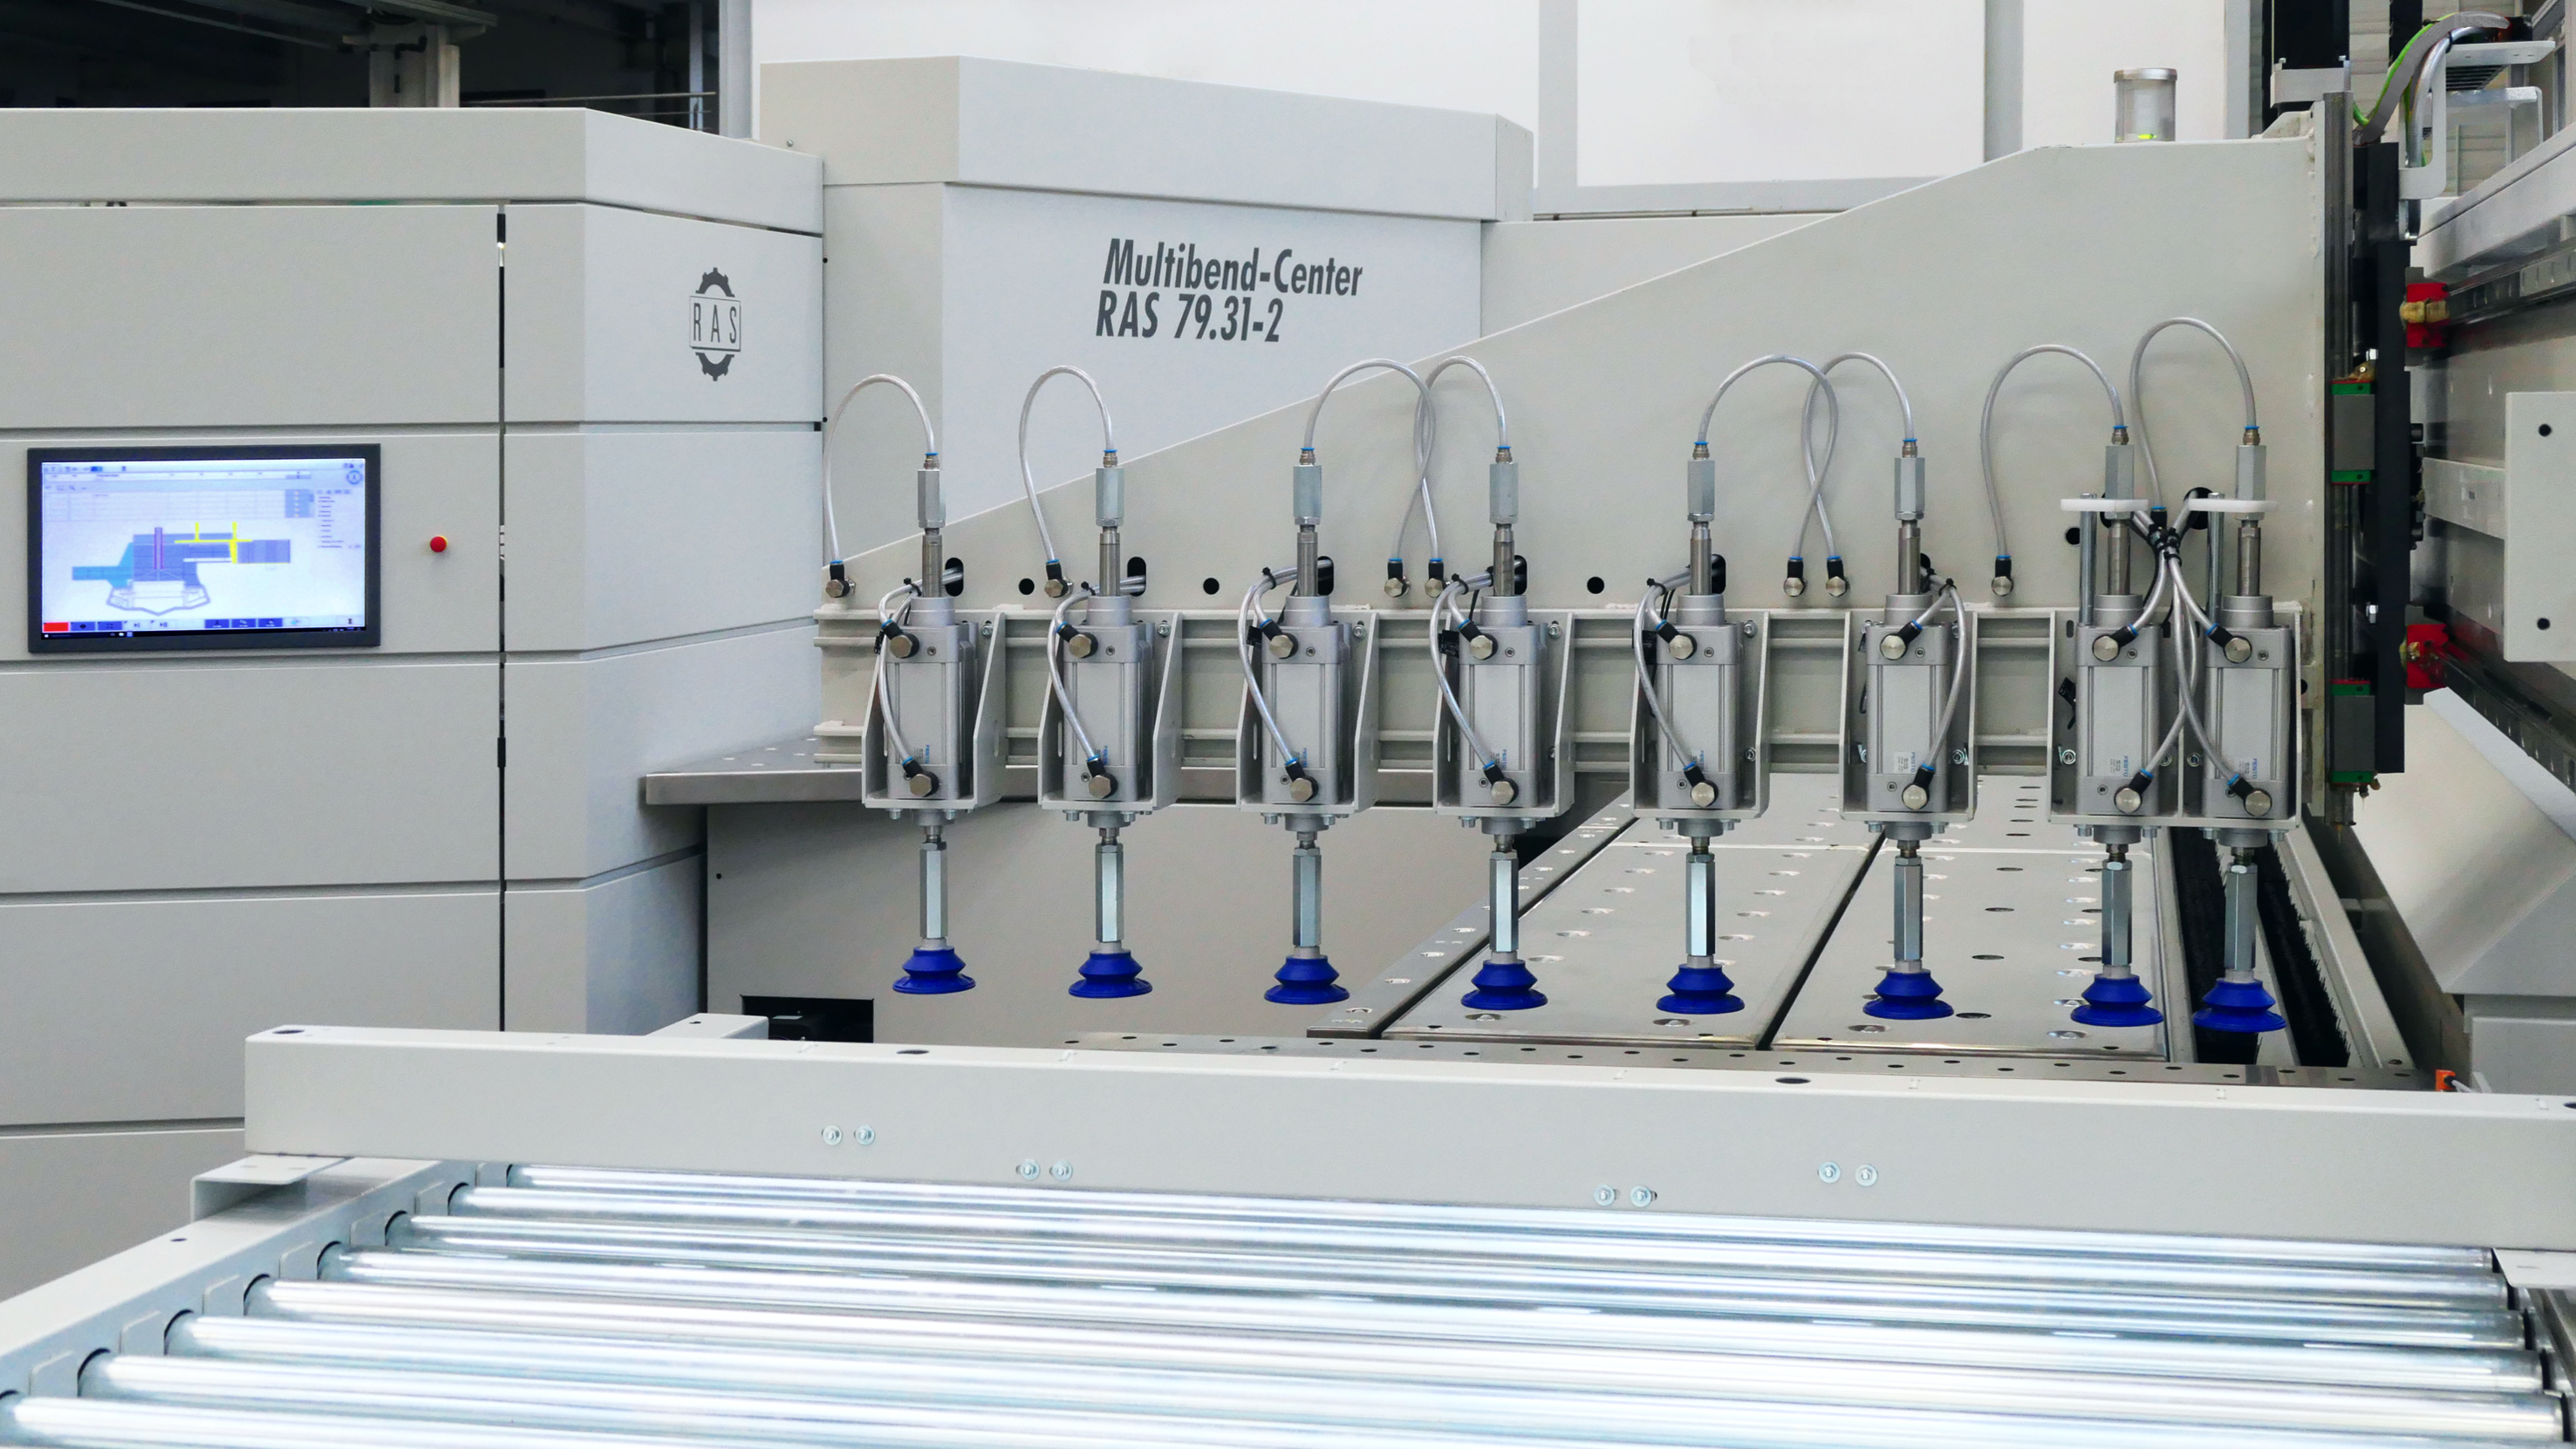 Roller table and MiniFeeder convey the blanks to the Multibend-Center